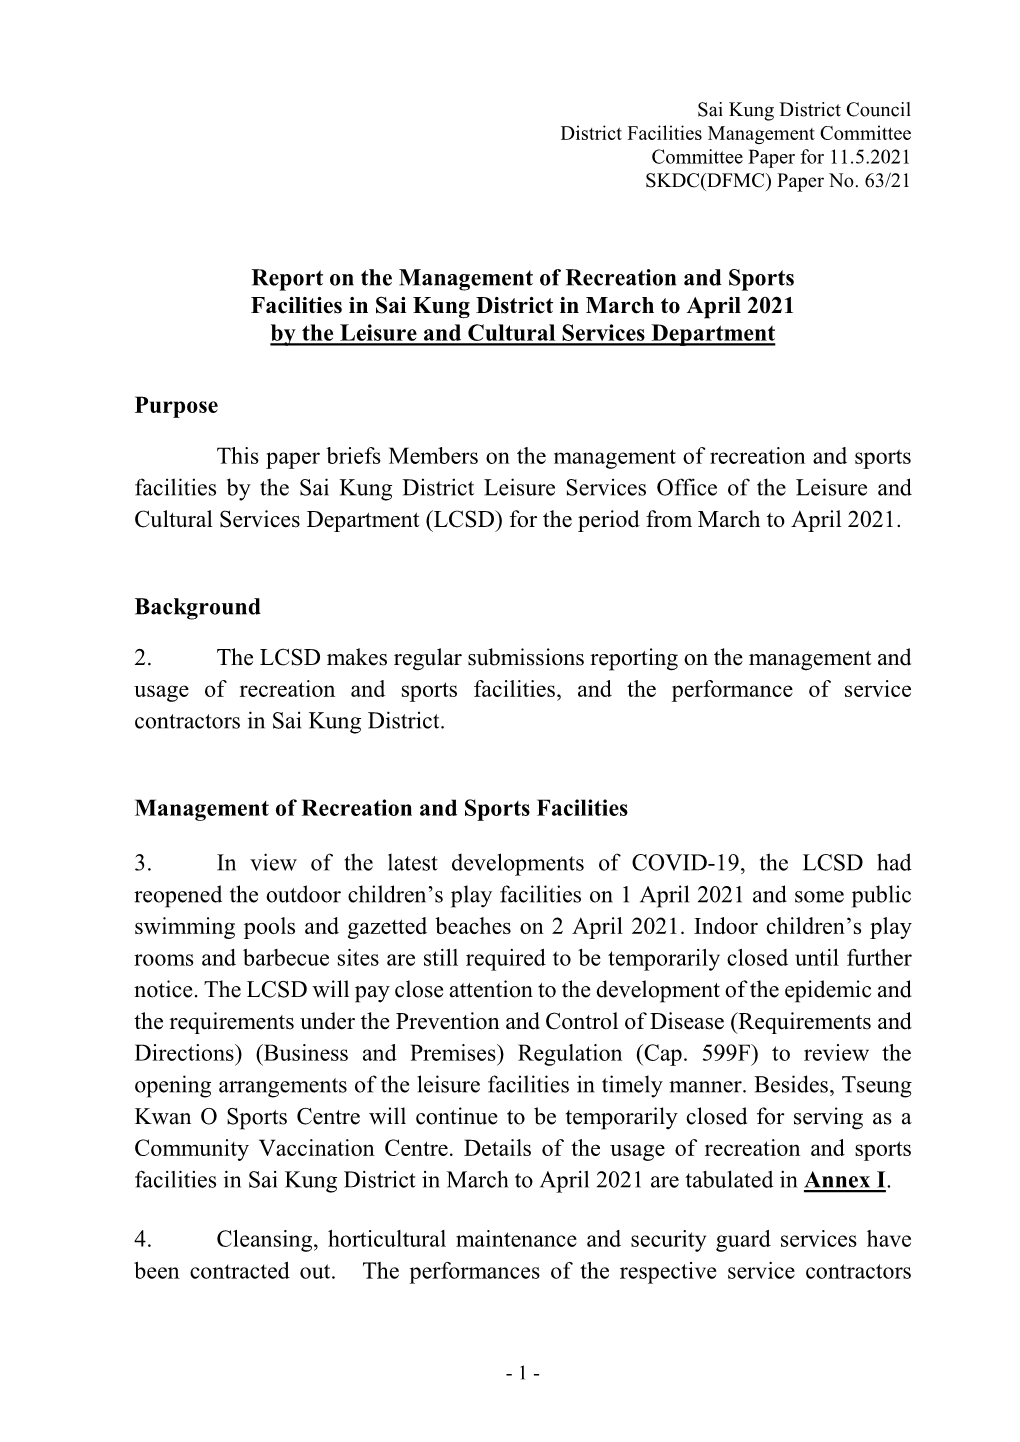 Report on the Management of Recreation and Sports Facilities in Sai Kung District in March to April 2021 by the Leisure and Cultural Services Department